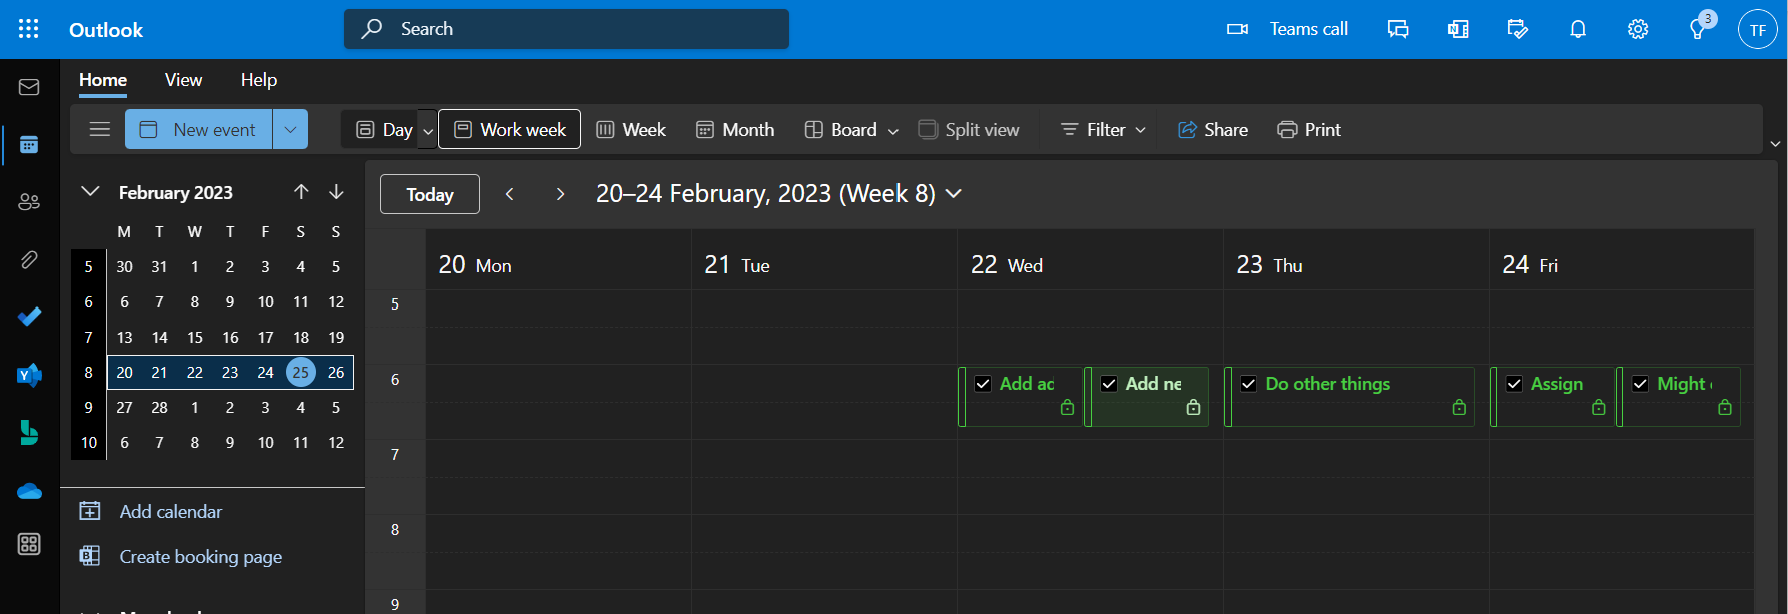 tasks in the outlook calendar after importing with the flow